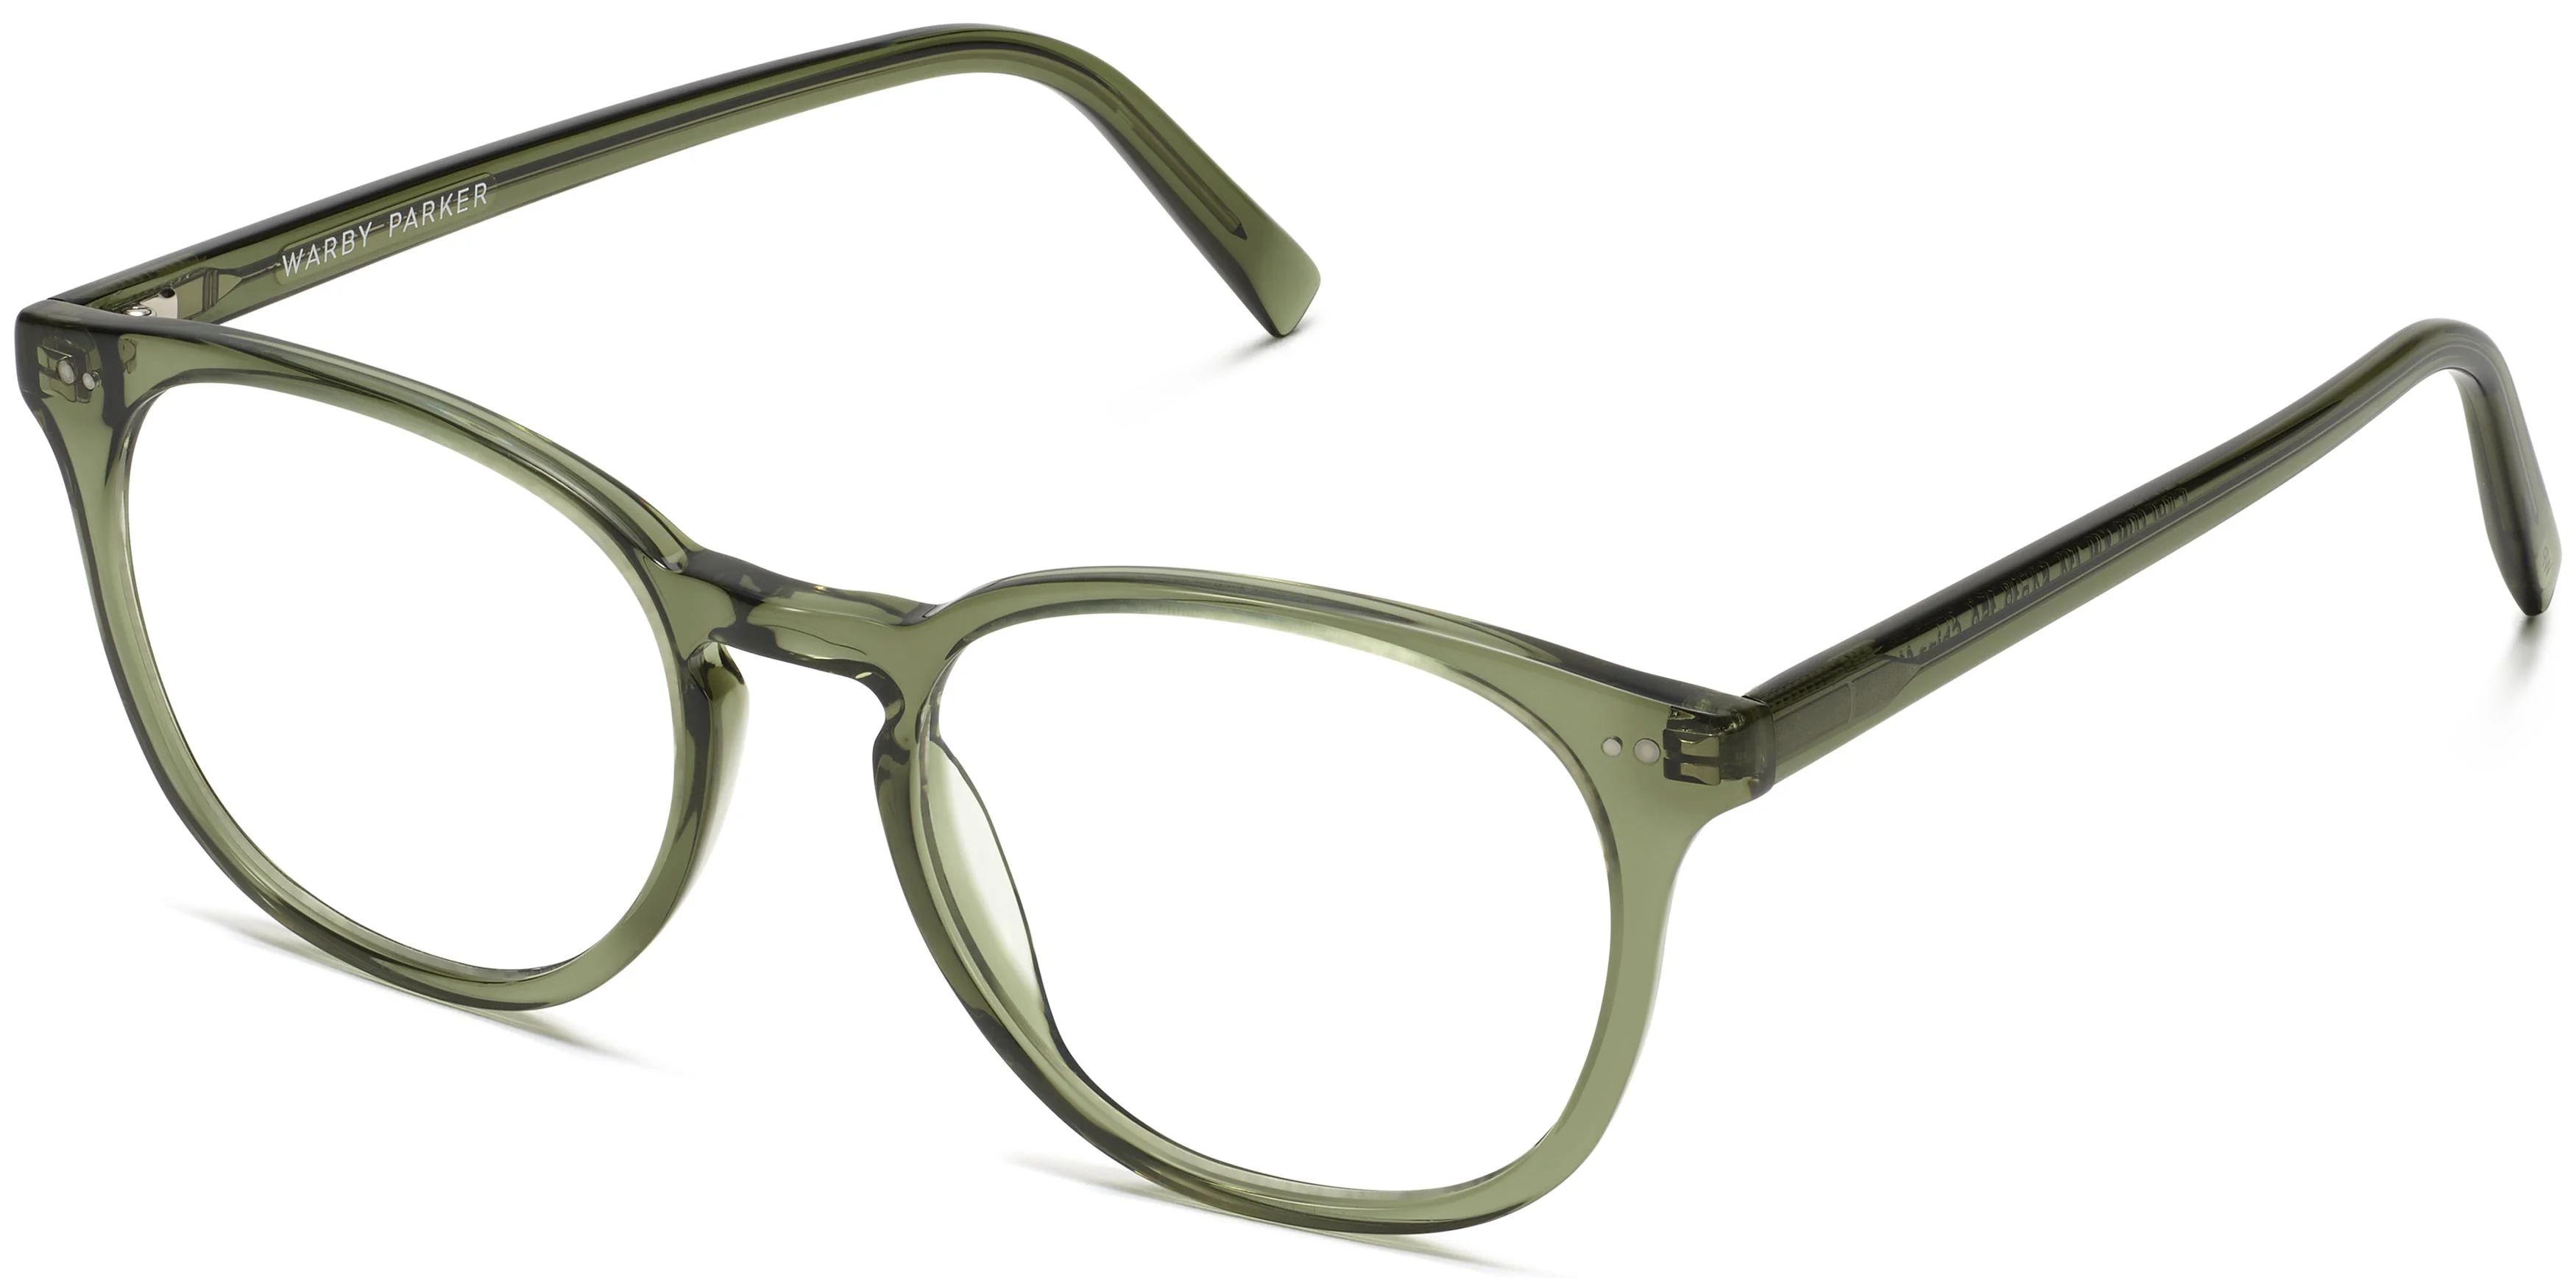 Carlton Eyeglasses in Ristretto Tortoise | Warby Parker | Warby Parker (US)